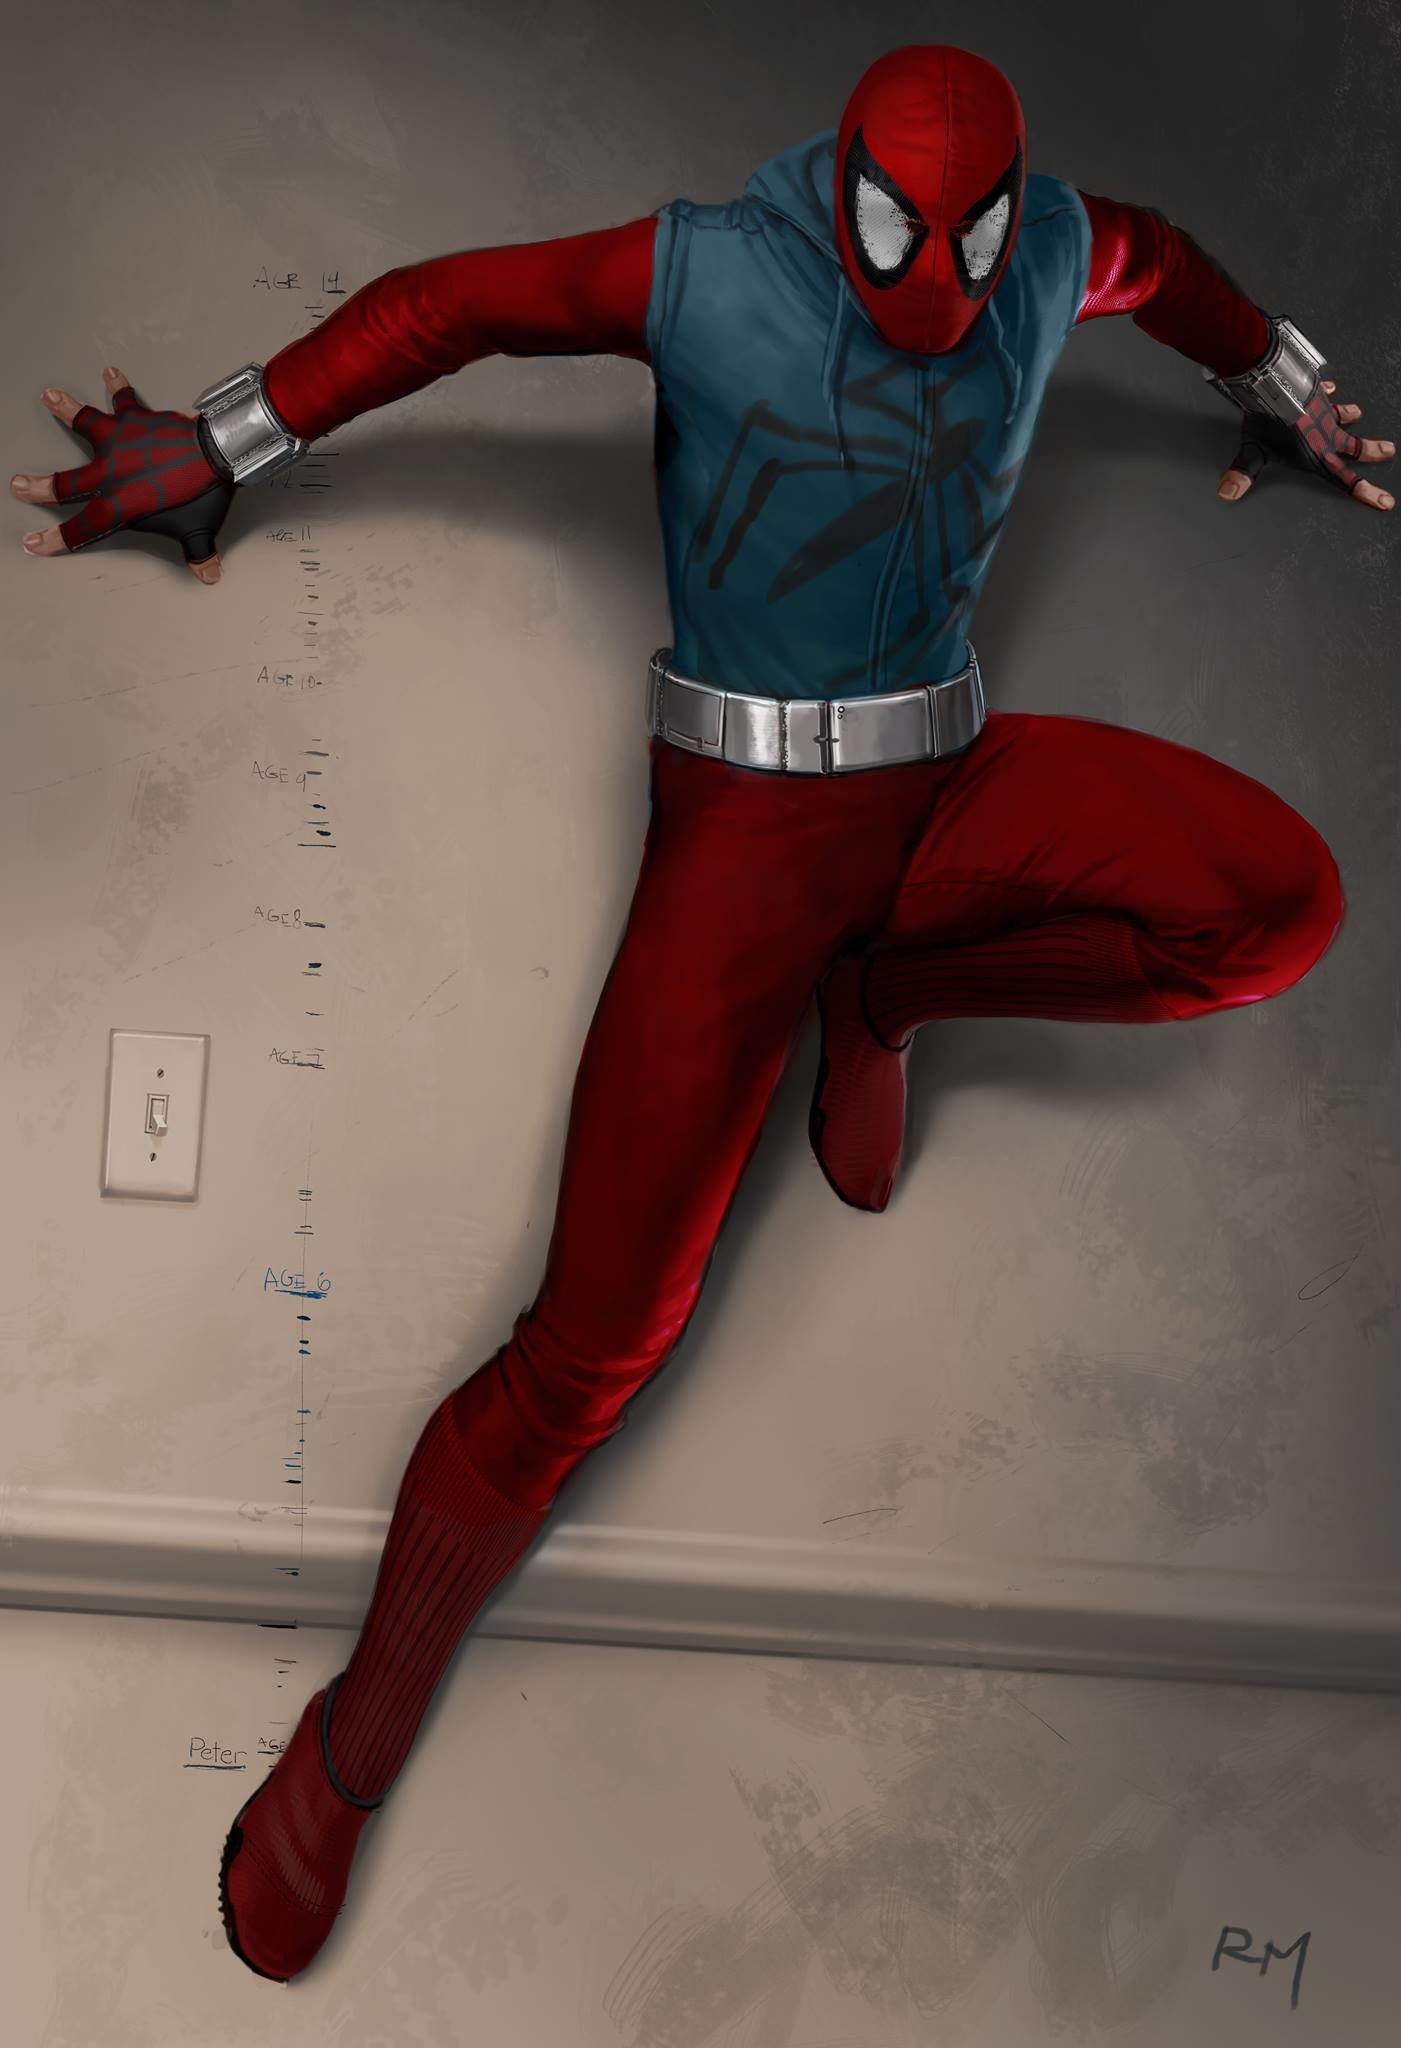 The Official Spider-Man: Homecoming Suit 2017-12-18 Auction - 3 Price  Results - ScreenBid in CA